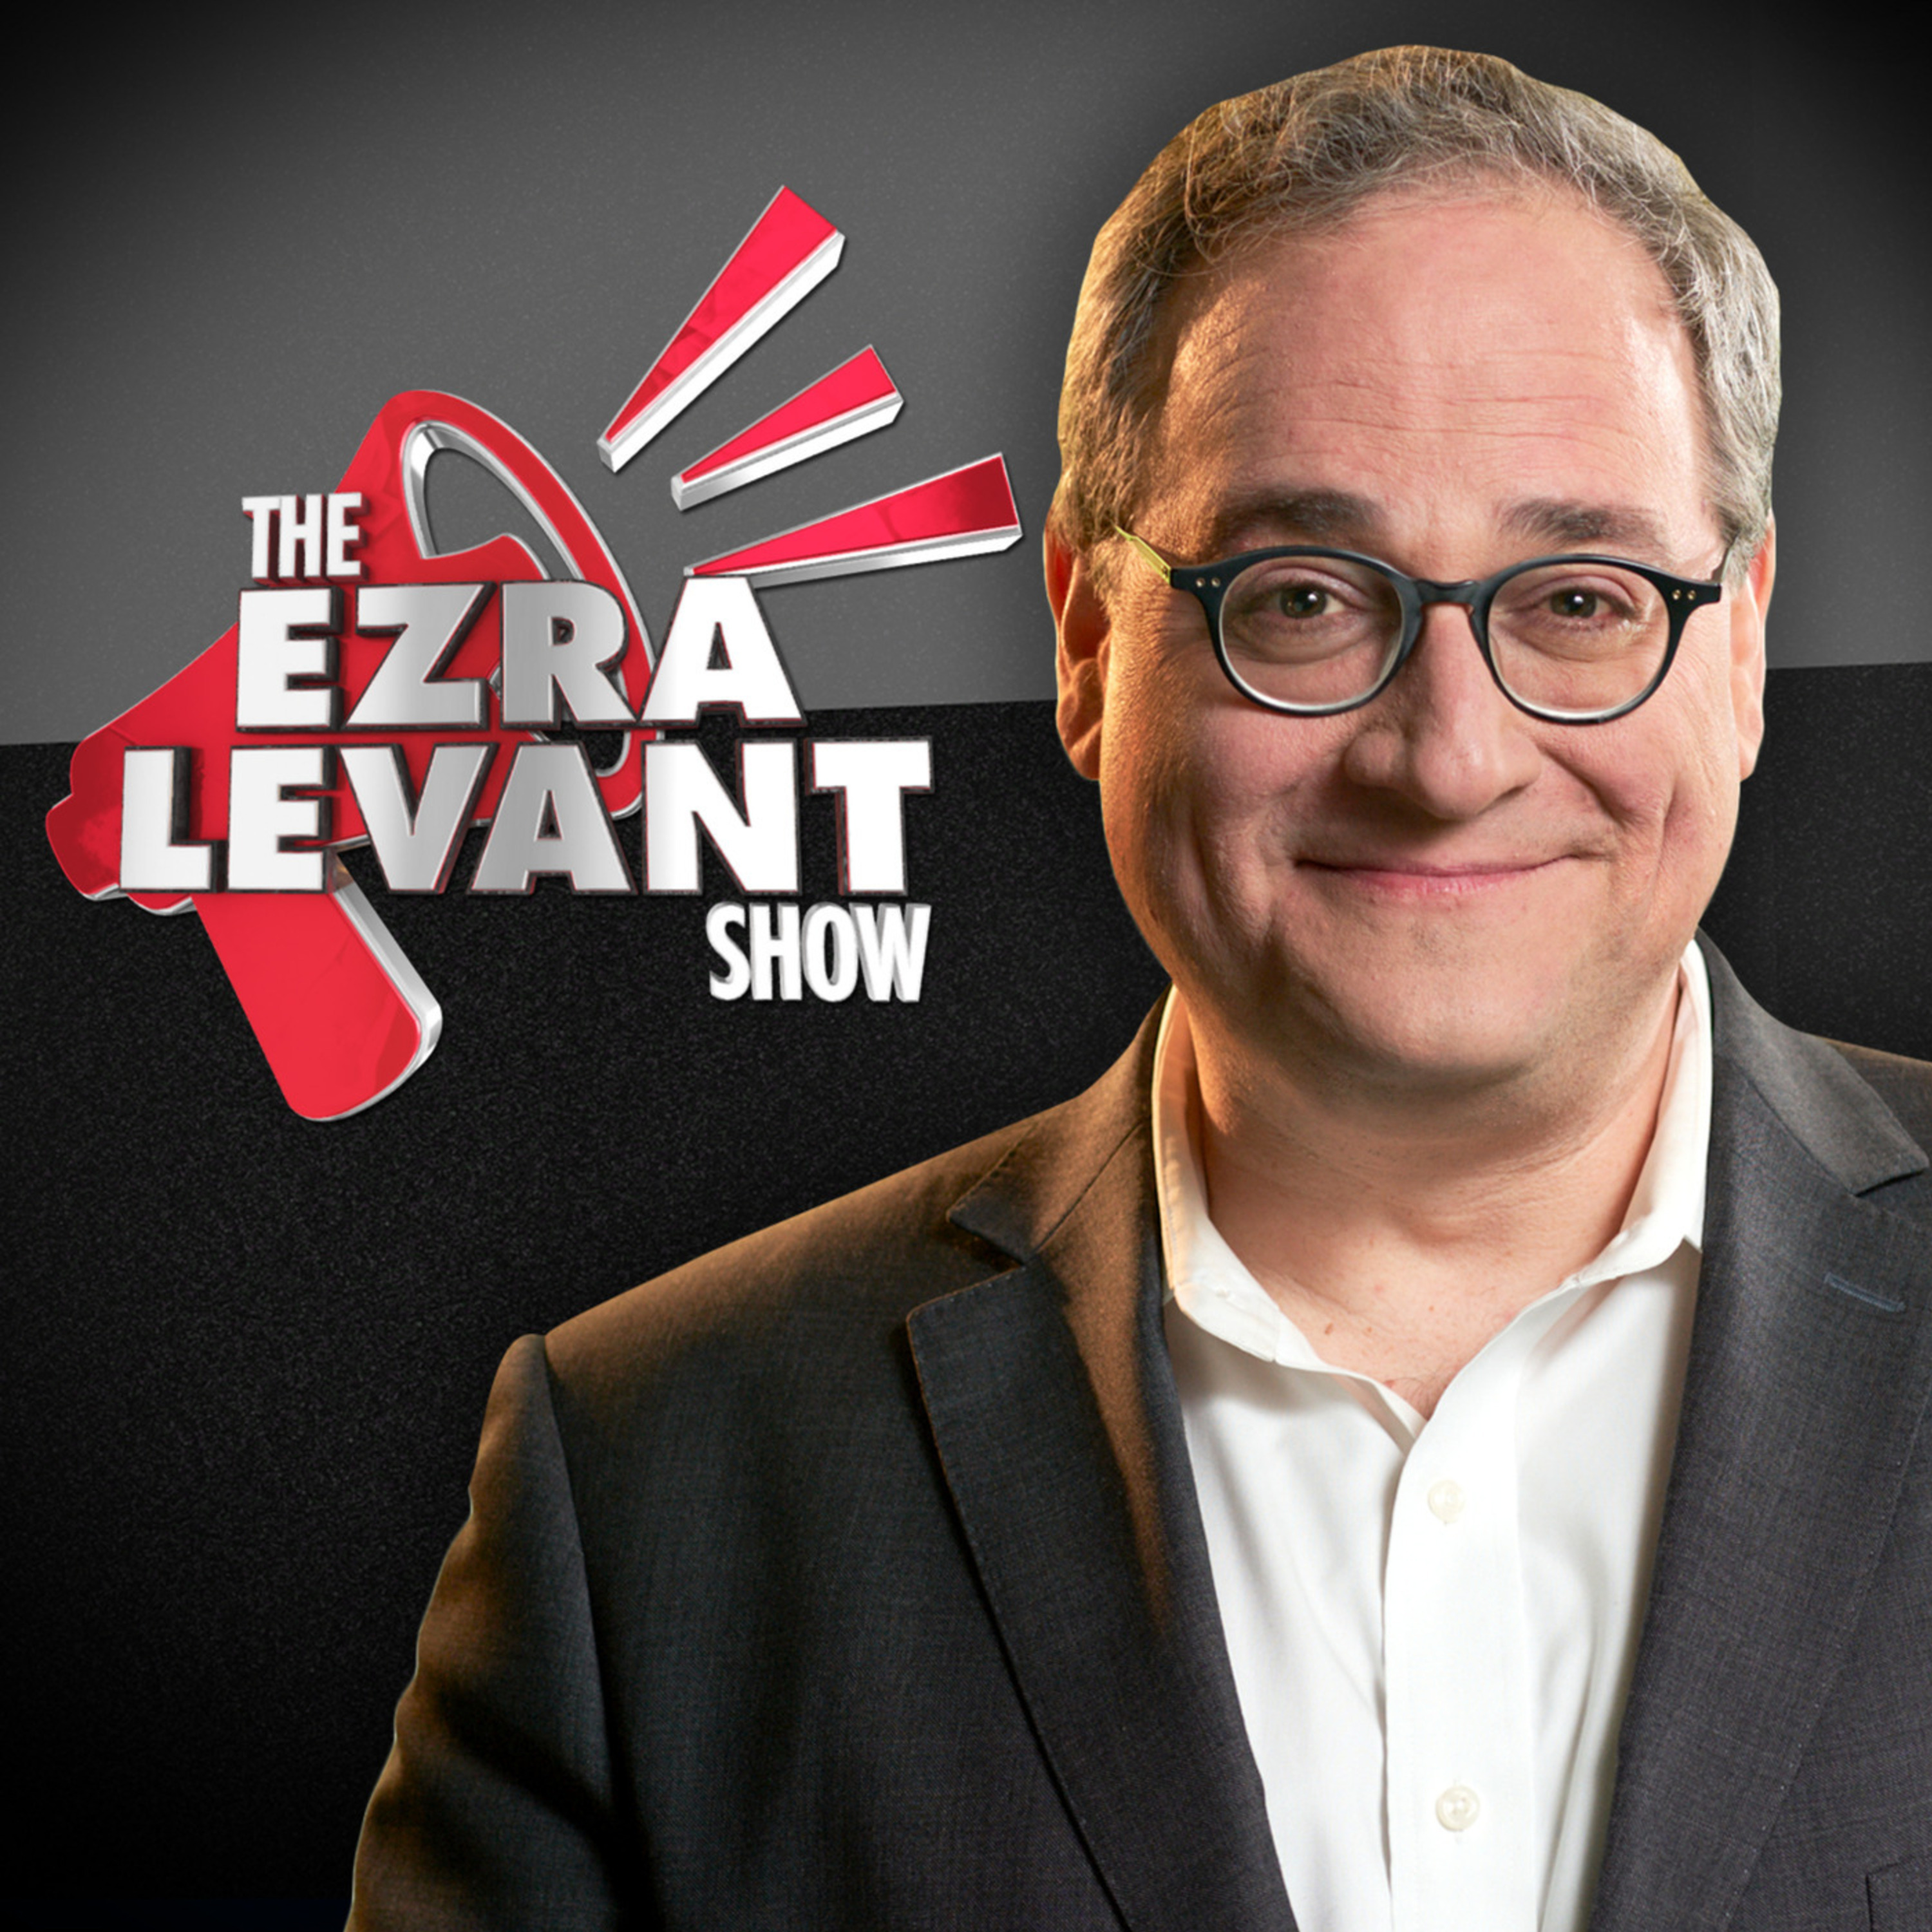 EZRA LEVANT | Hands down the best reporting I’ve seen about the war in Israel so far